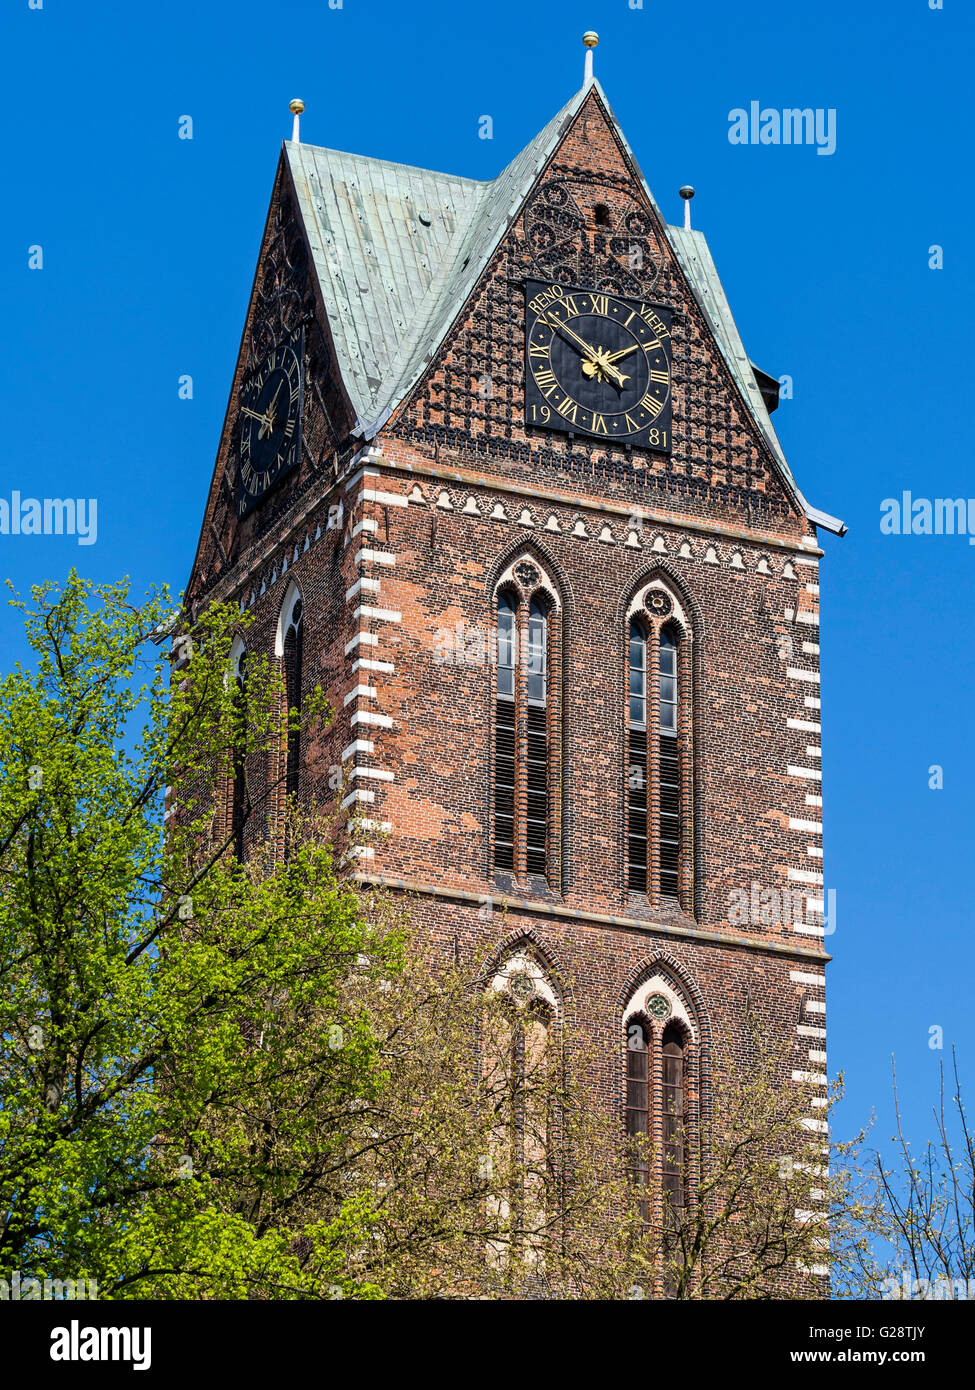 Tower of St. Mary church, remaining ruin left after 2. world war, Wismar, Germany Stock Photo